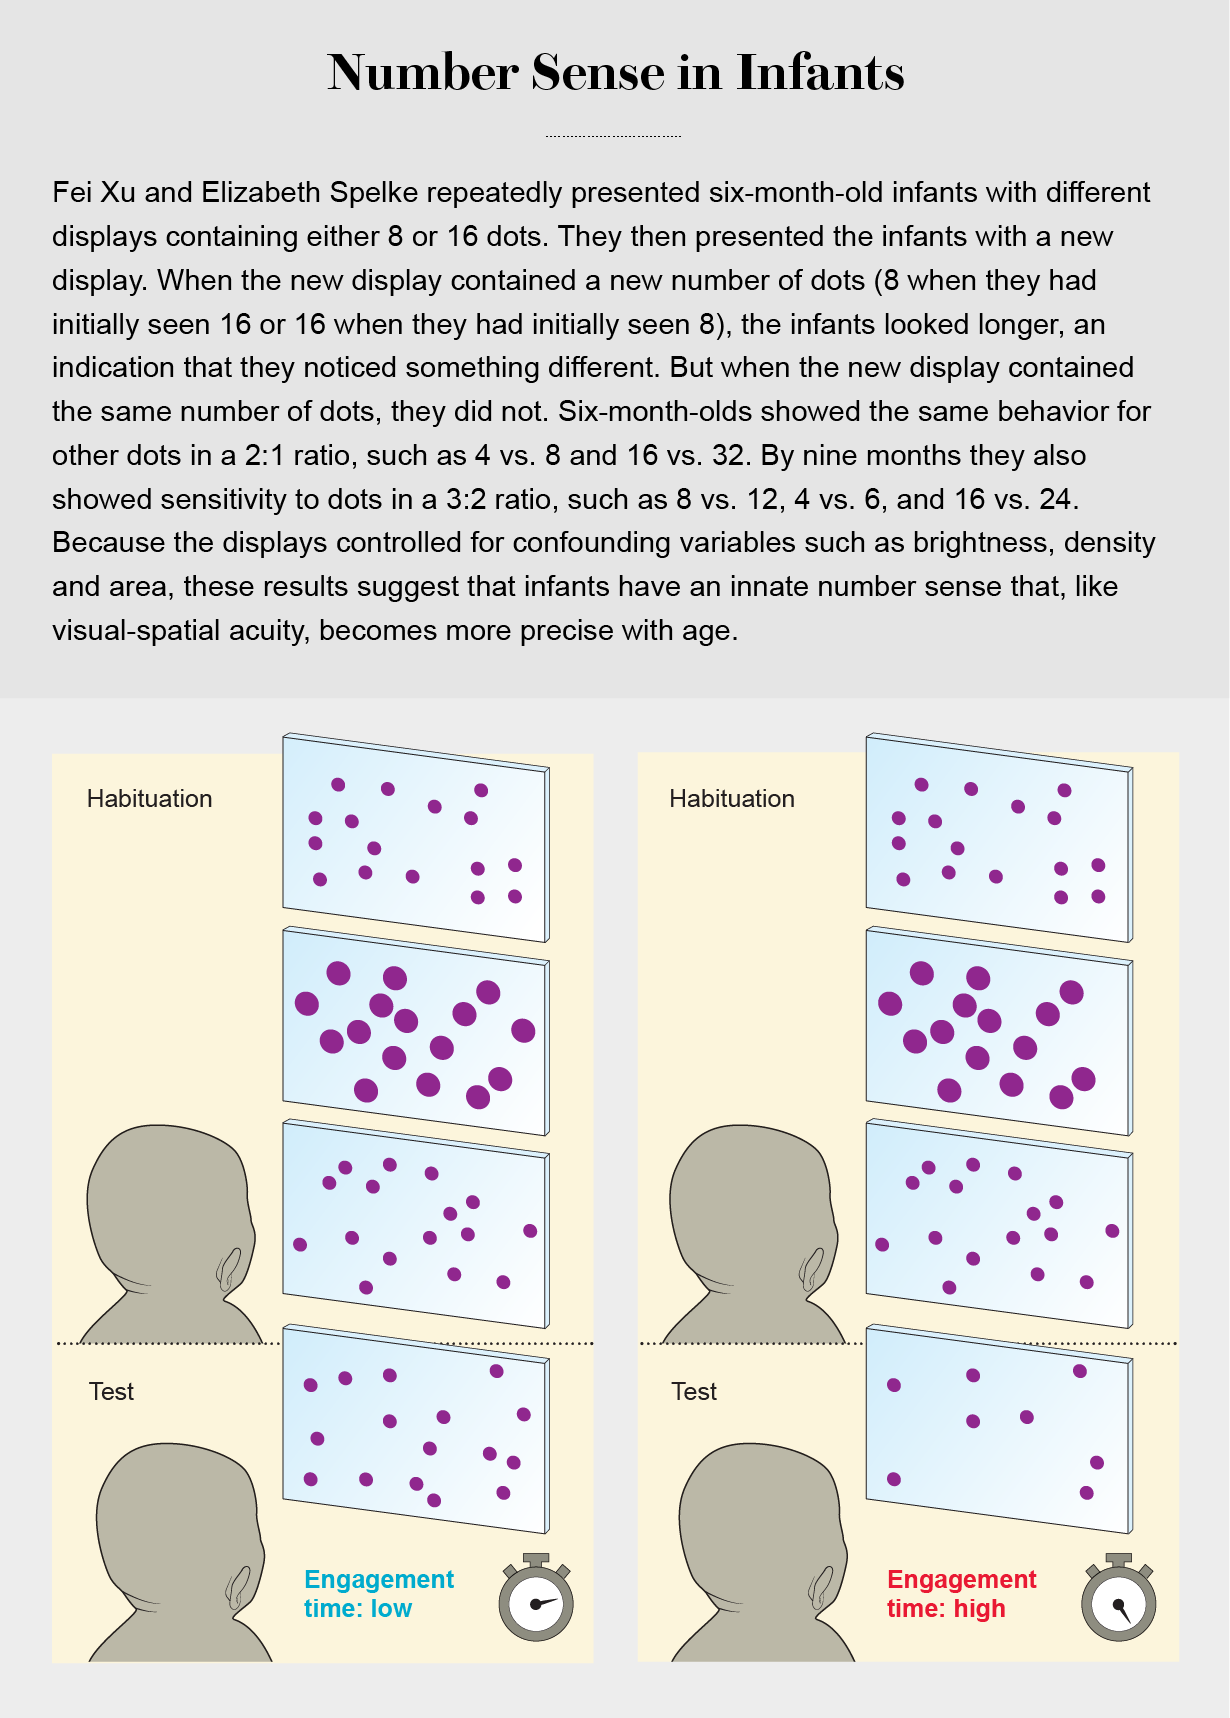 Graphic depicts an experiment where infants were shown a series of displays containing dots in various sizes and arrangements. The babies looked longer when a display in the series showed a different number of dots than they had seen before, as opposed to a different iteration of the same number.